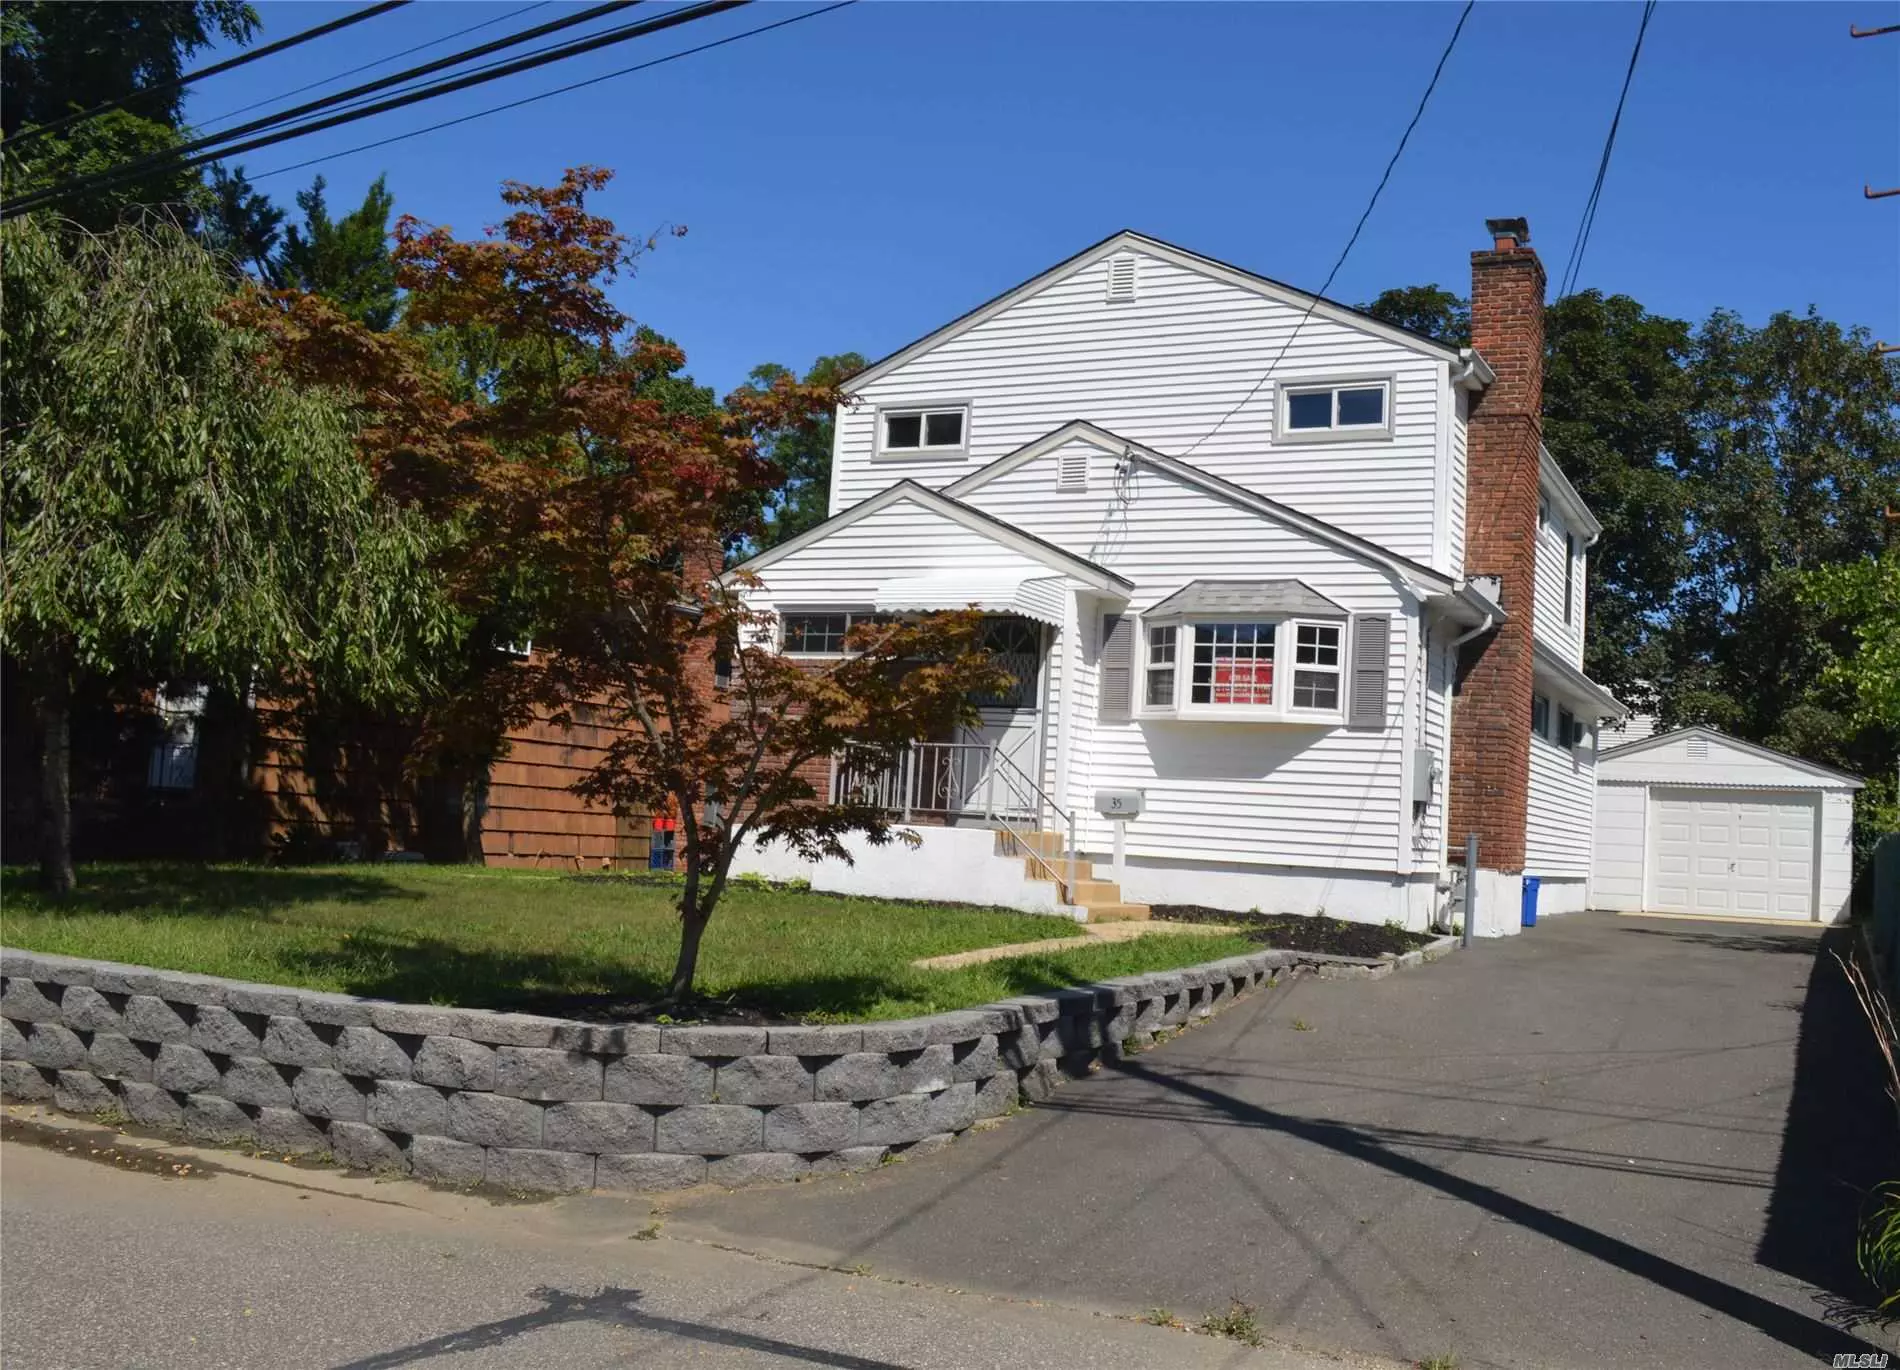 Large home. Recently refinished wood floors & painted inside and out. Bathrooms and kitchen are functional but do need updating. Located on the west end of town. Short Distance to beautiful beaches.